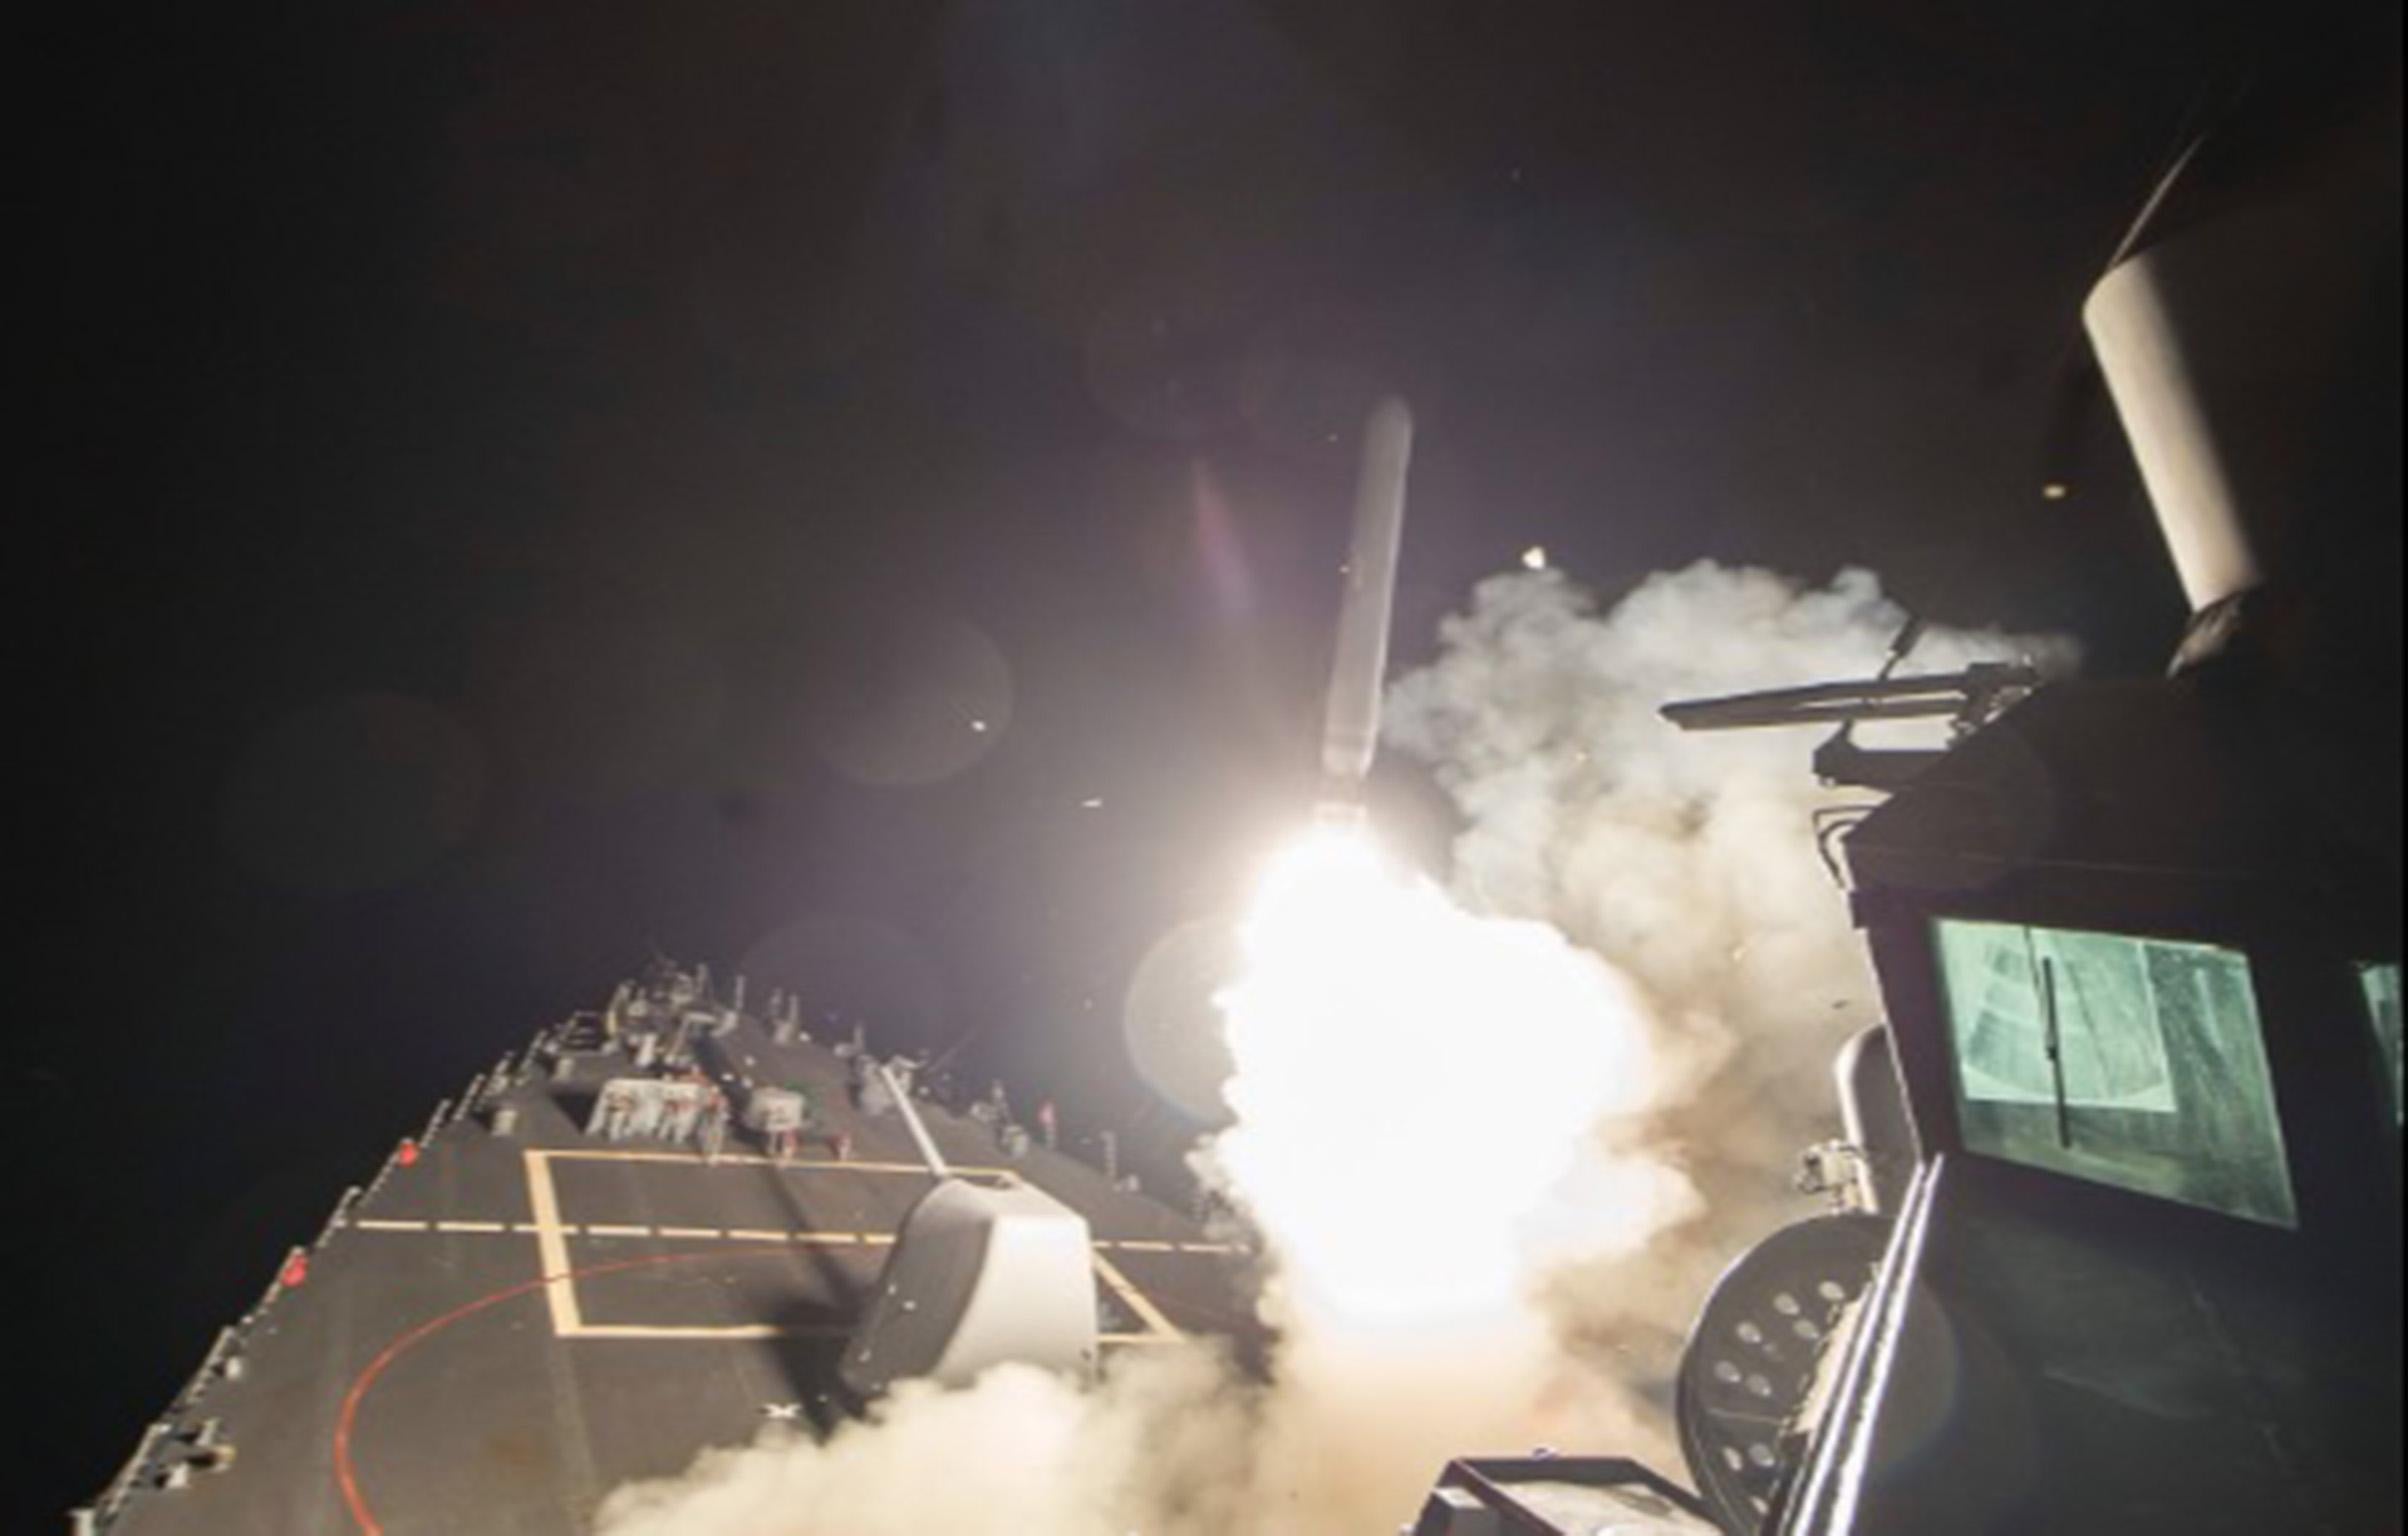 59 Tomahawk missiles were fired from the USS Porter and the USS Ross, the Pentagon said